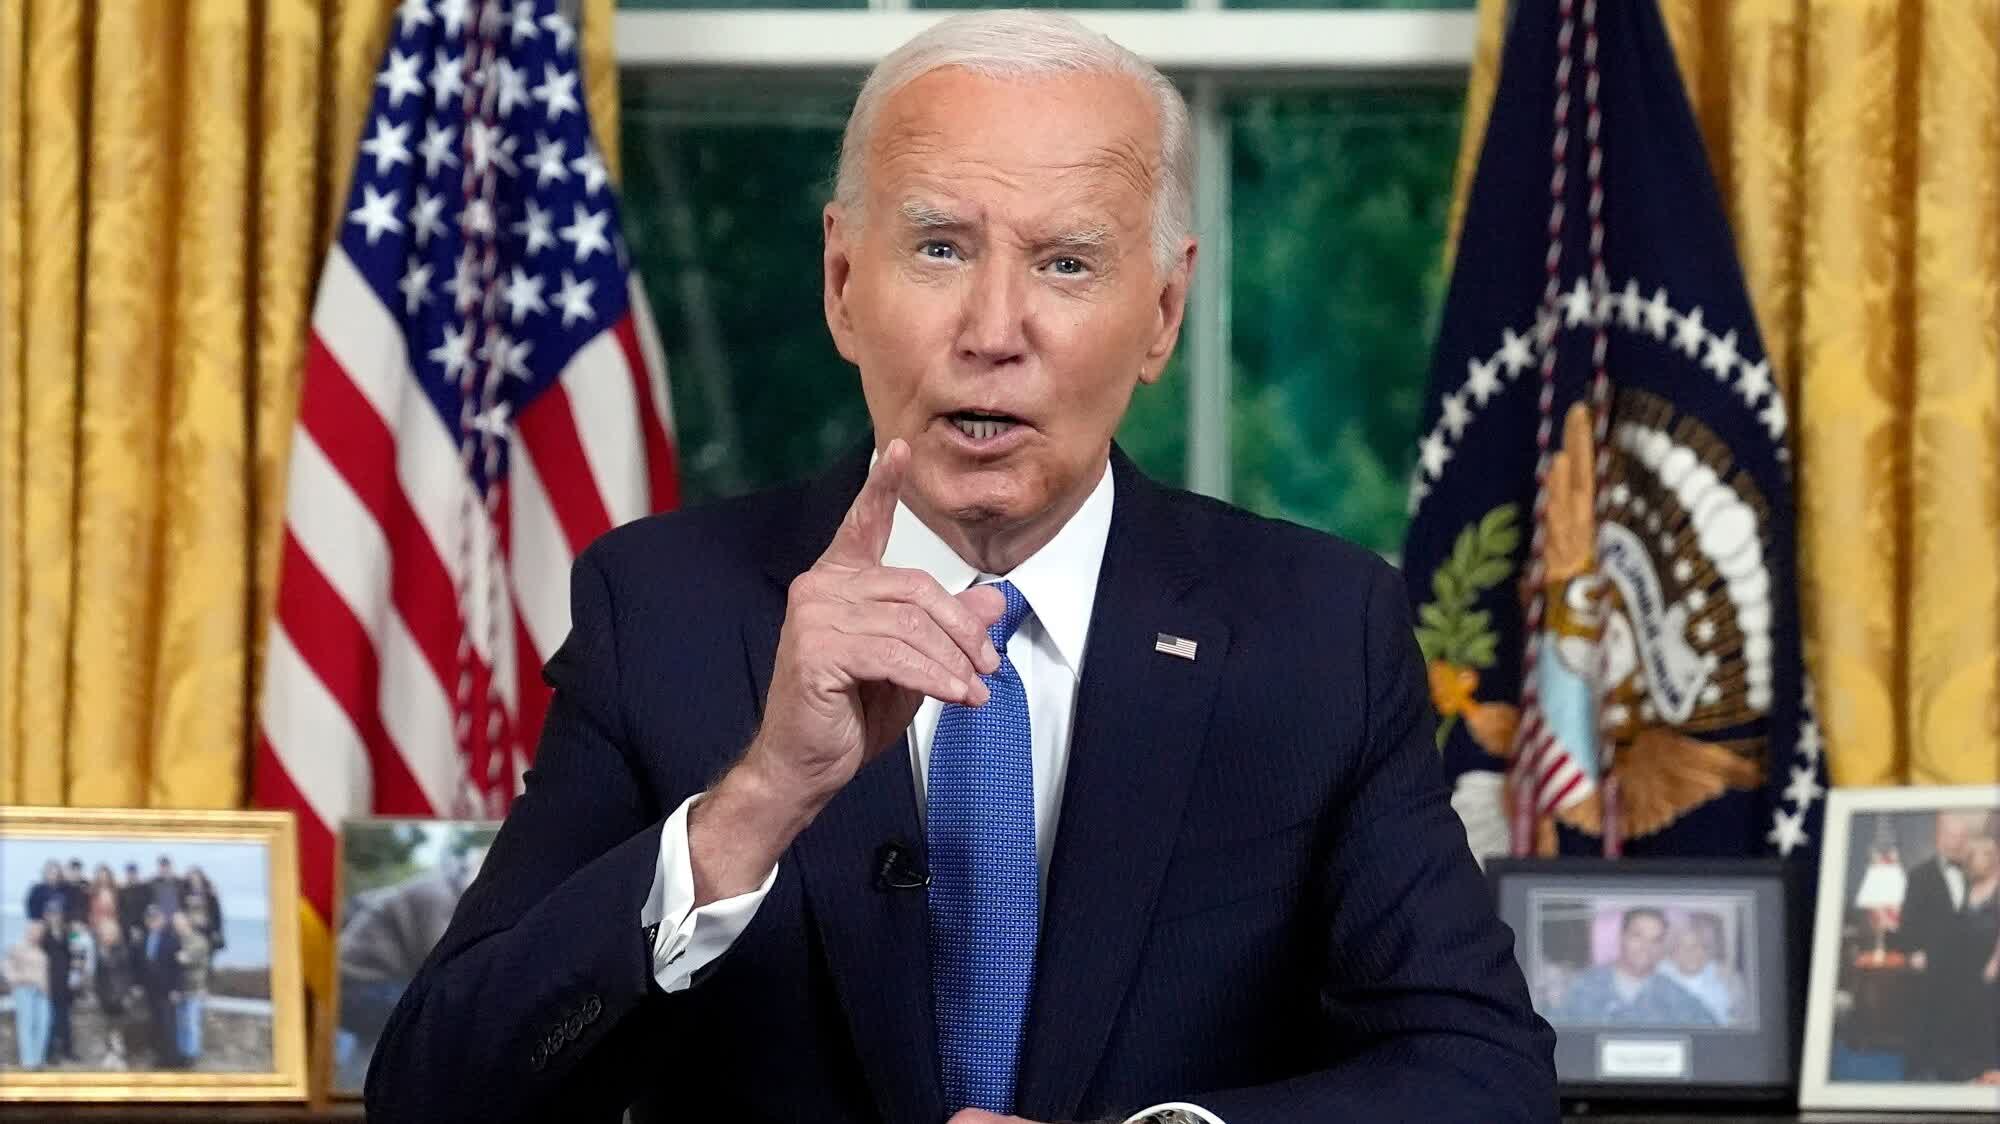 Biden elaborates on decision to withdraw from presidential contest